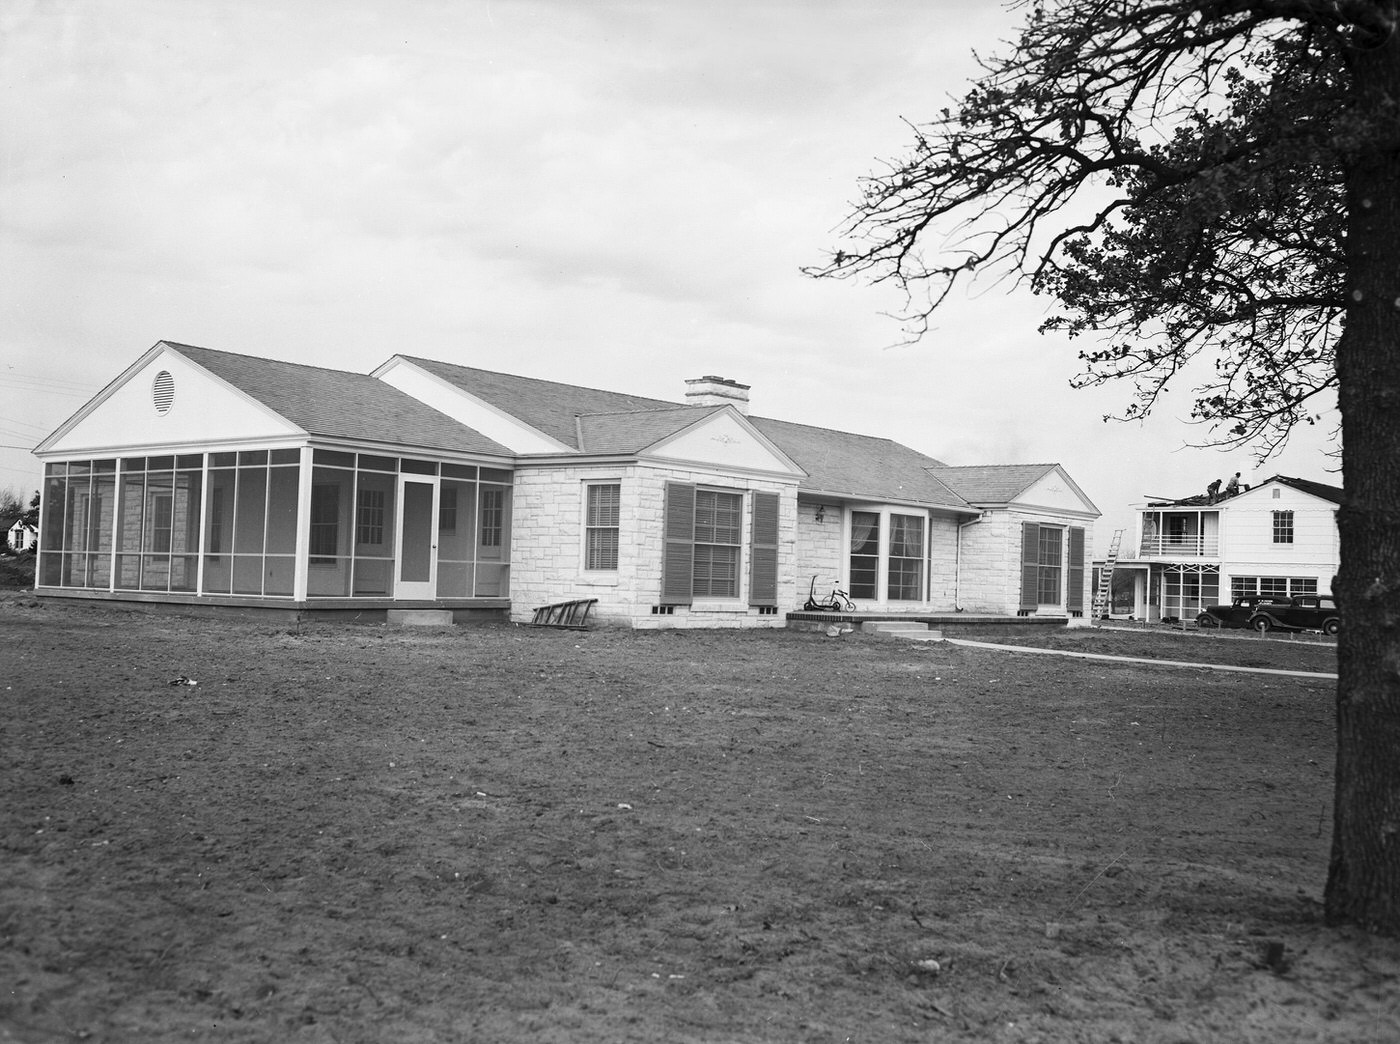 The new home of J. B. Baker Junior is at 1801 Bolton Street, Fort Worth, Texas, 1942